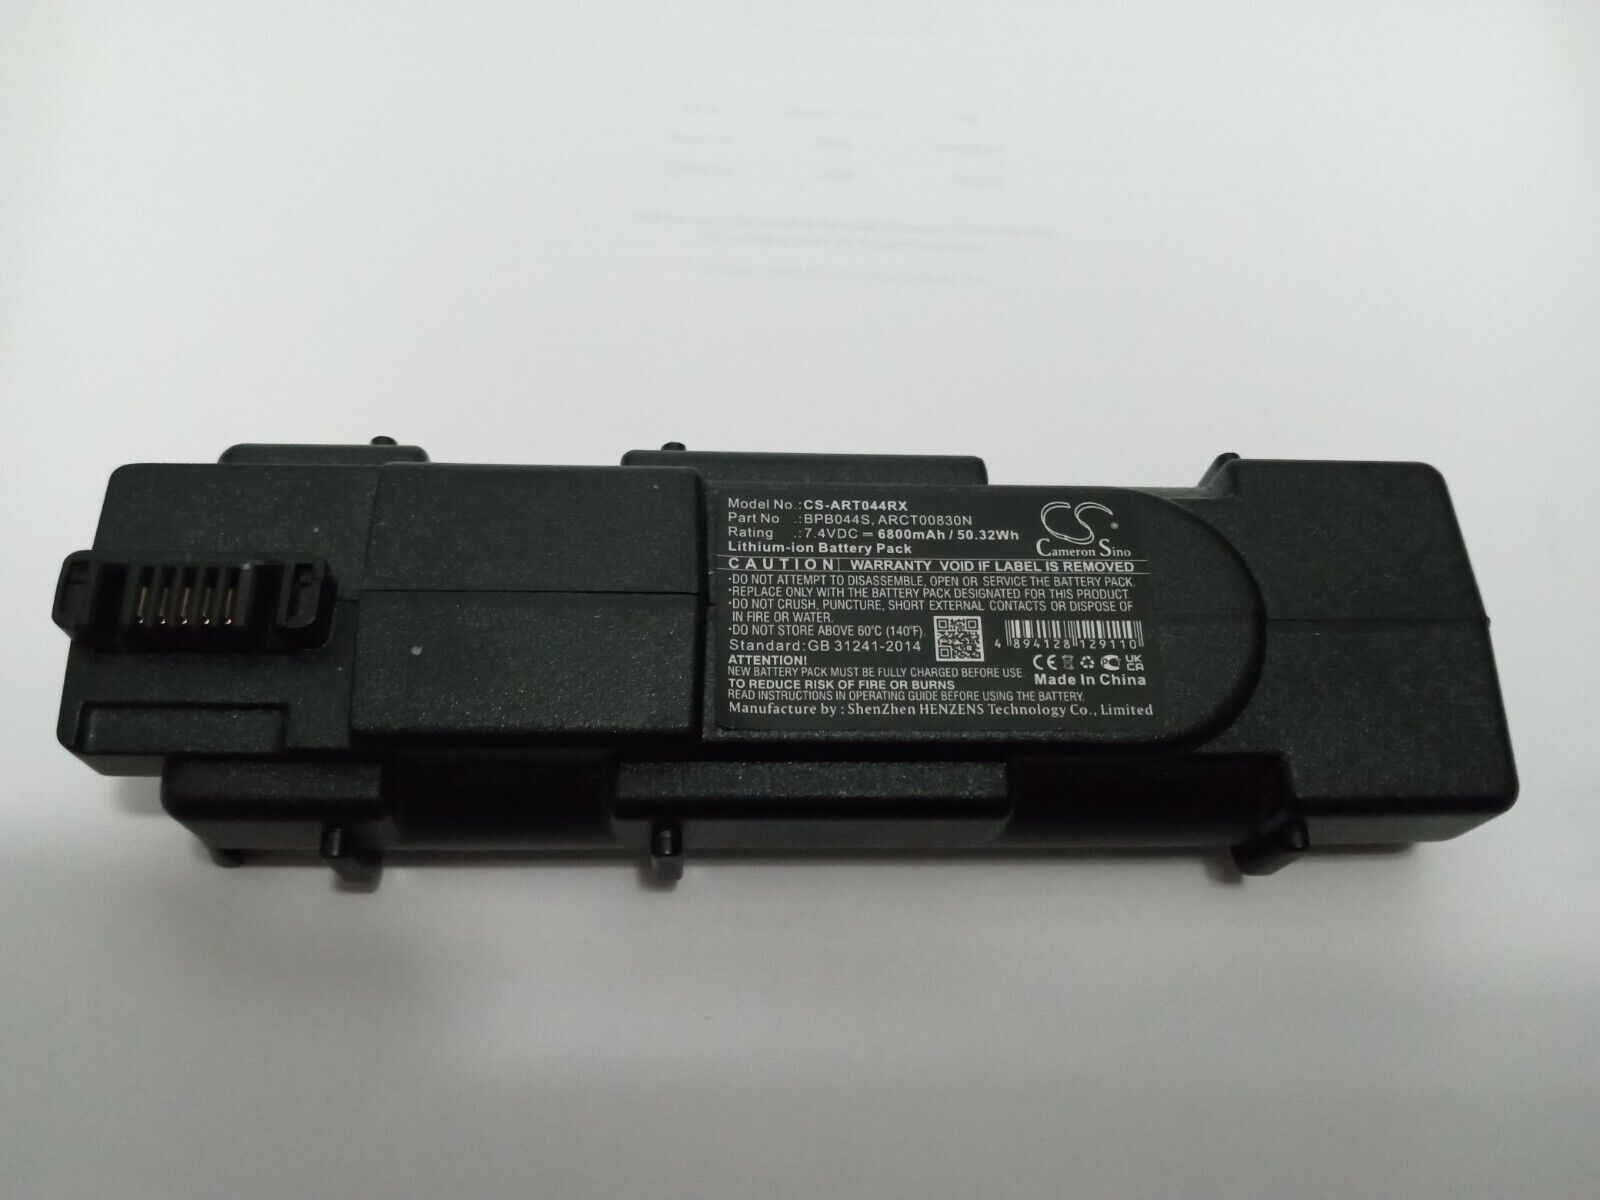 BPB044S 7.4V, 6800mAH ARRIS modem telephone backup battery used about one month.